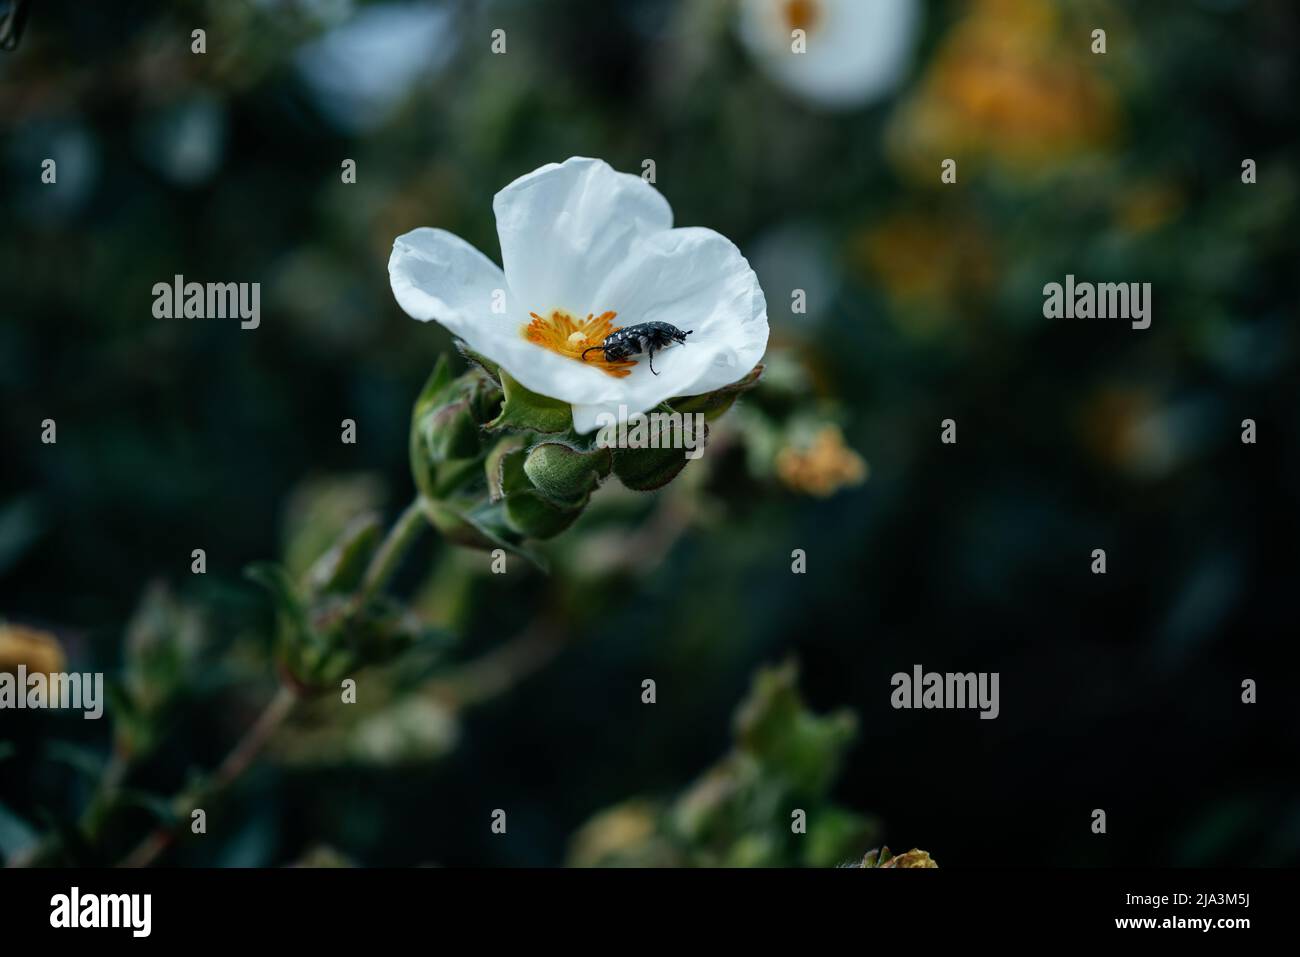 White Potentilla Abbotswood flower with a black bug in the garden in Italy Stock Photo